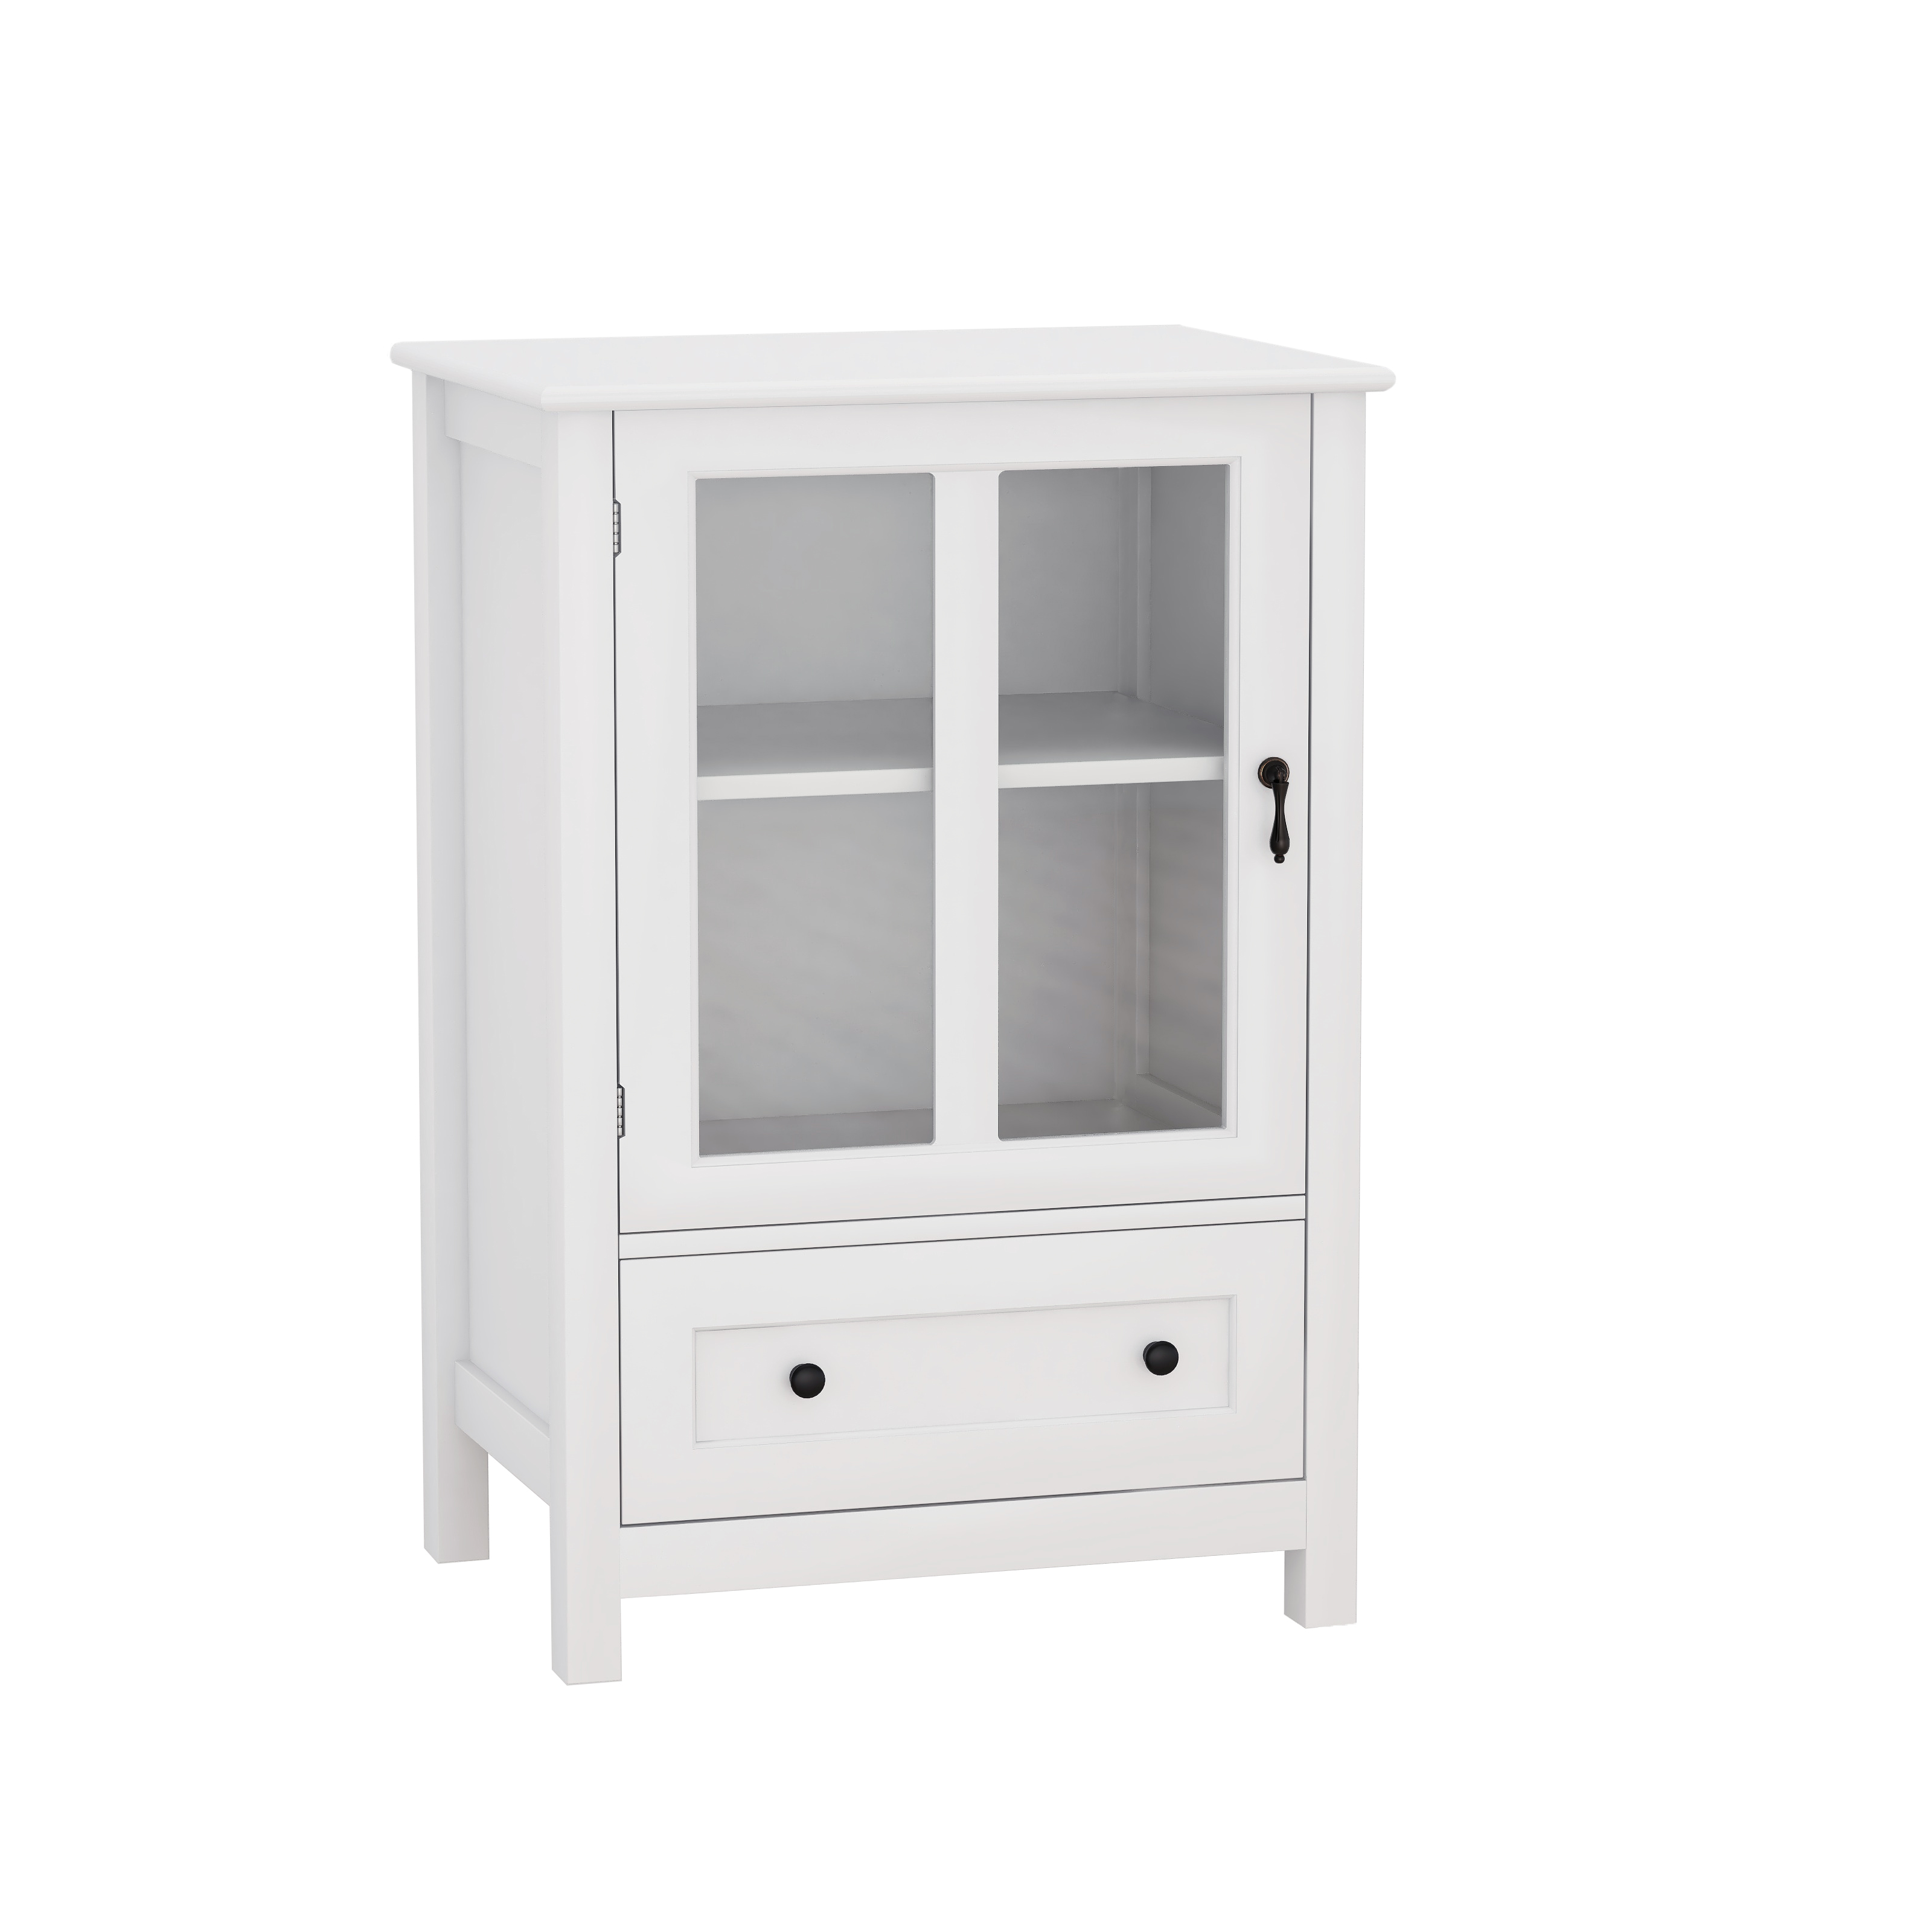 Buffet storage cabinet with single glass doors and unique bell handle-CASAINC